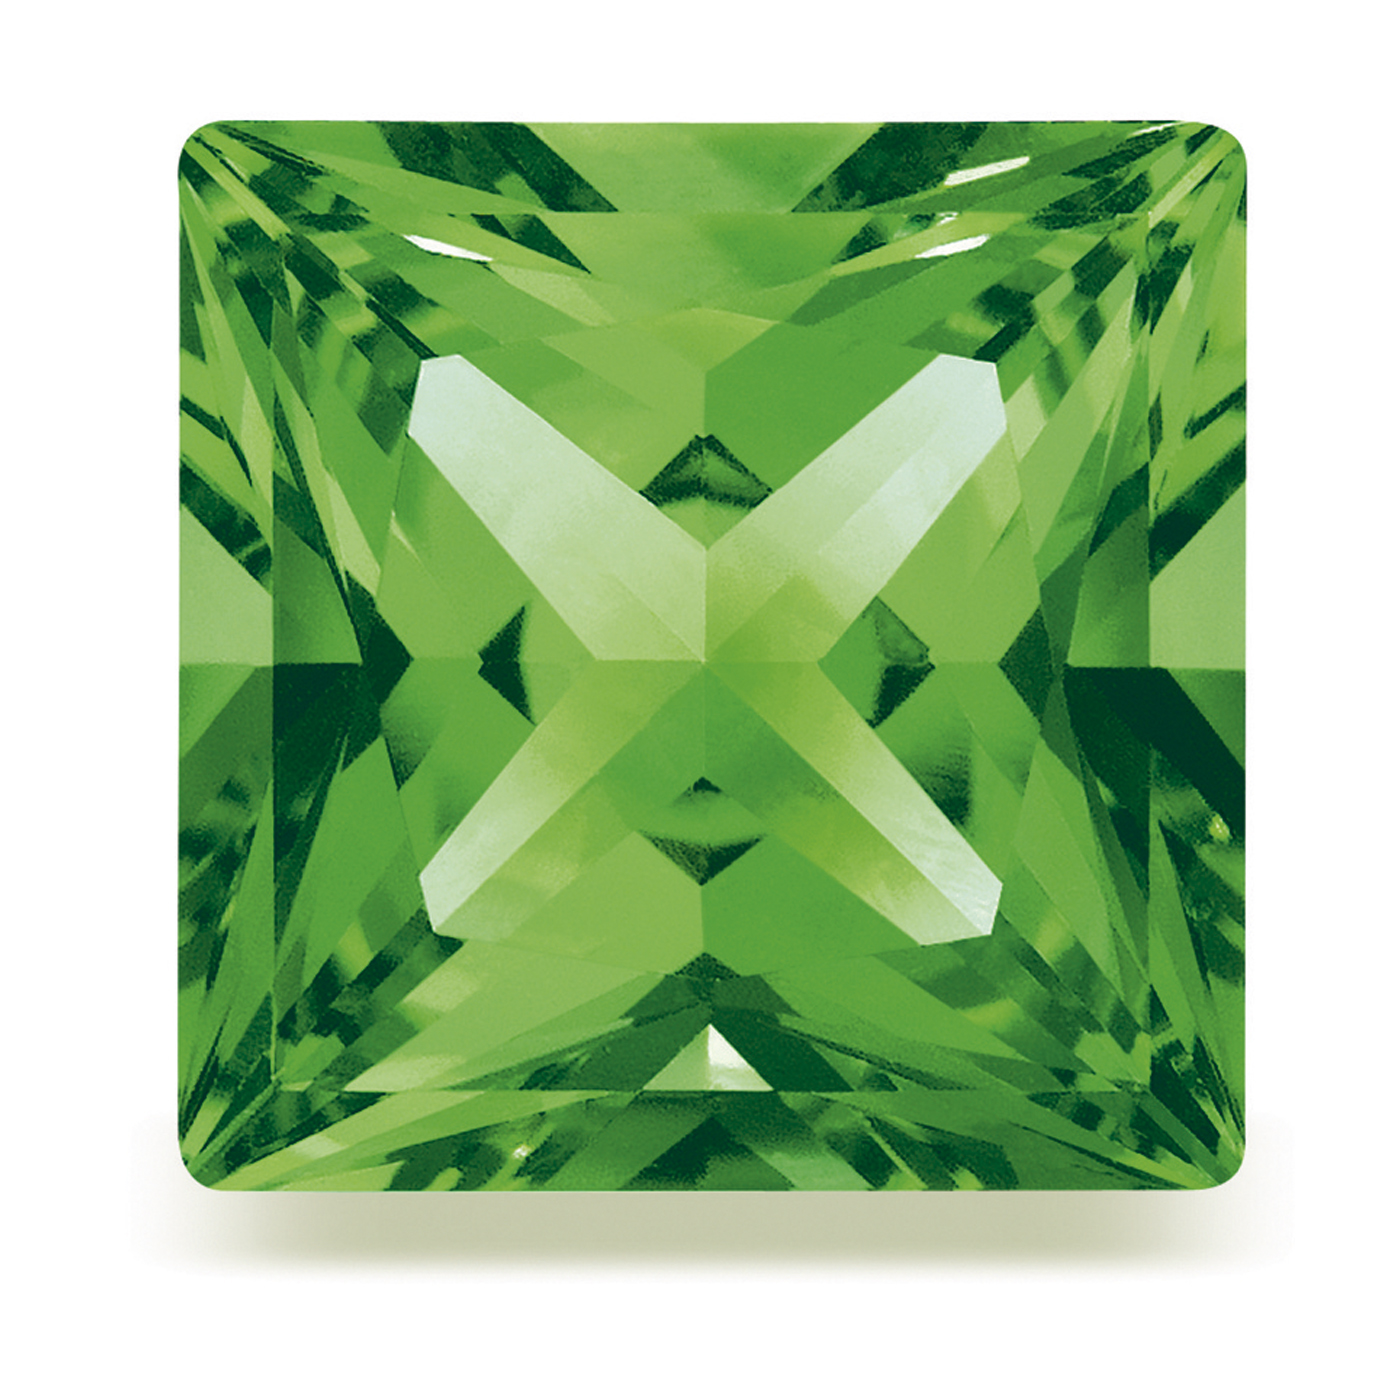 Alpinit, Synthetic, Carré, Green, Faceted, 3.00 x 3.00 mm - 1 piece